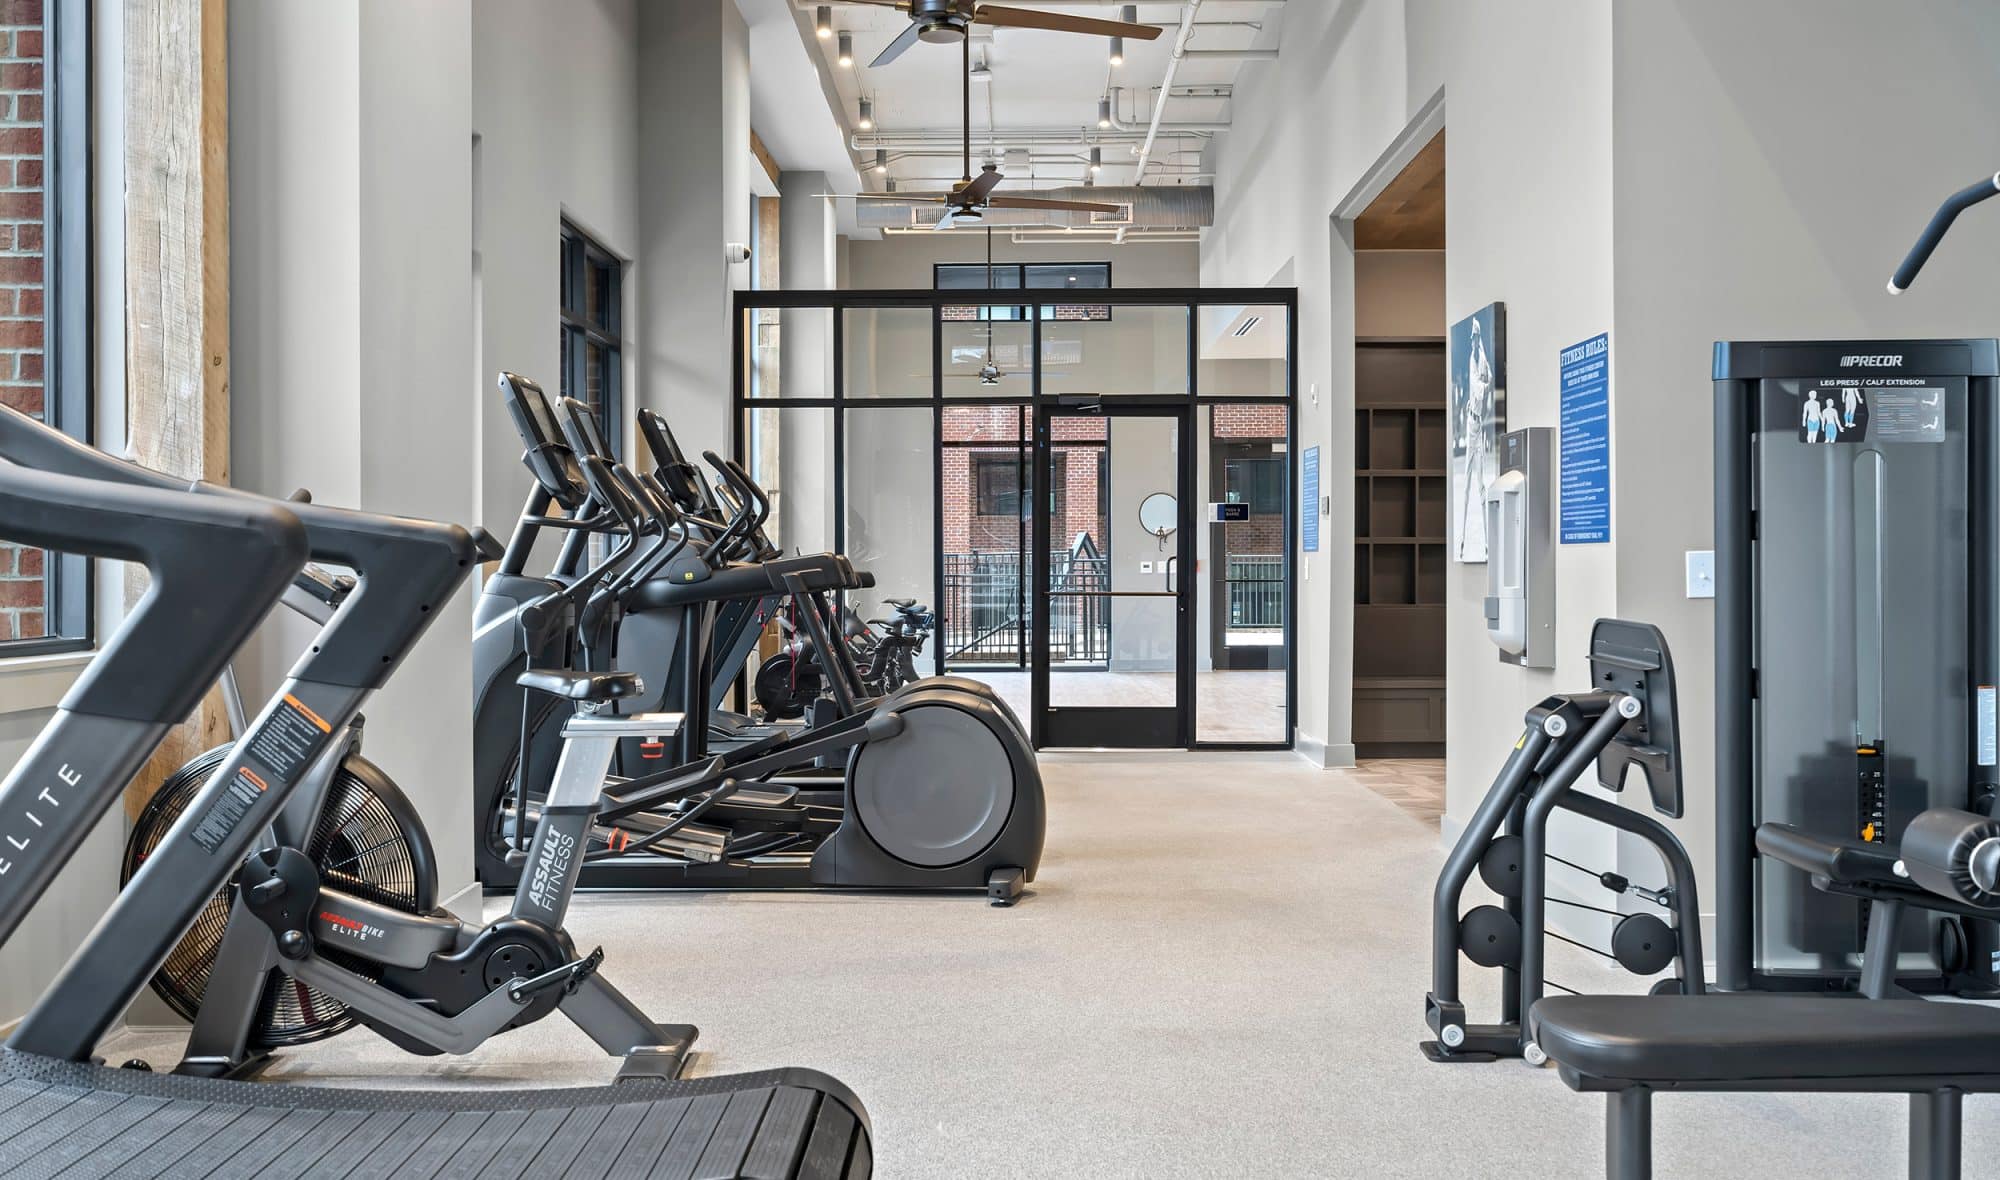 Fitness center at .408 Jackson Apartments